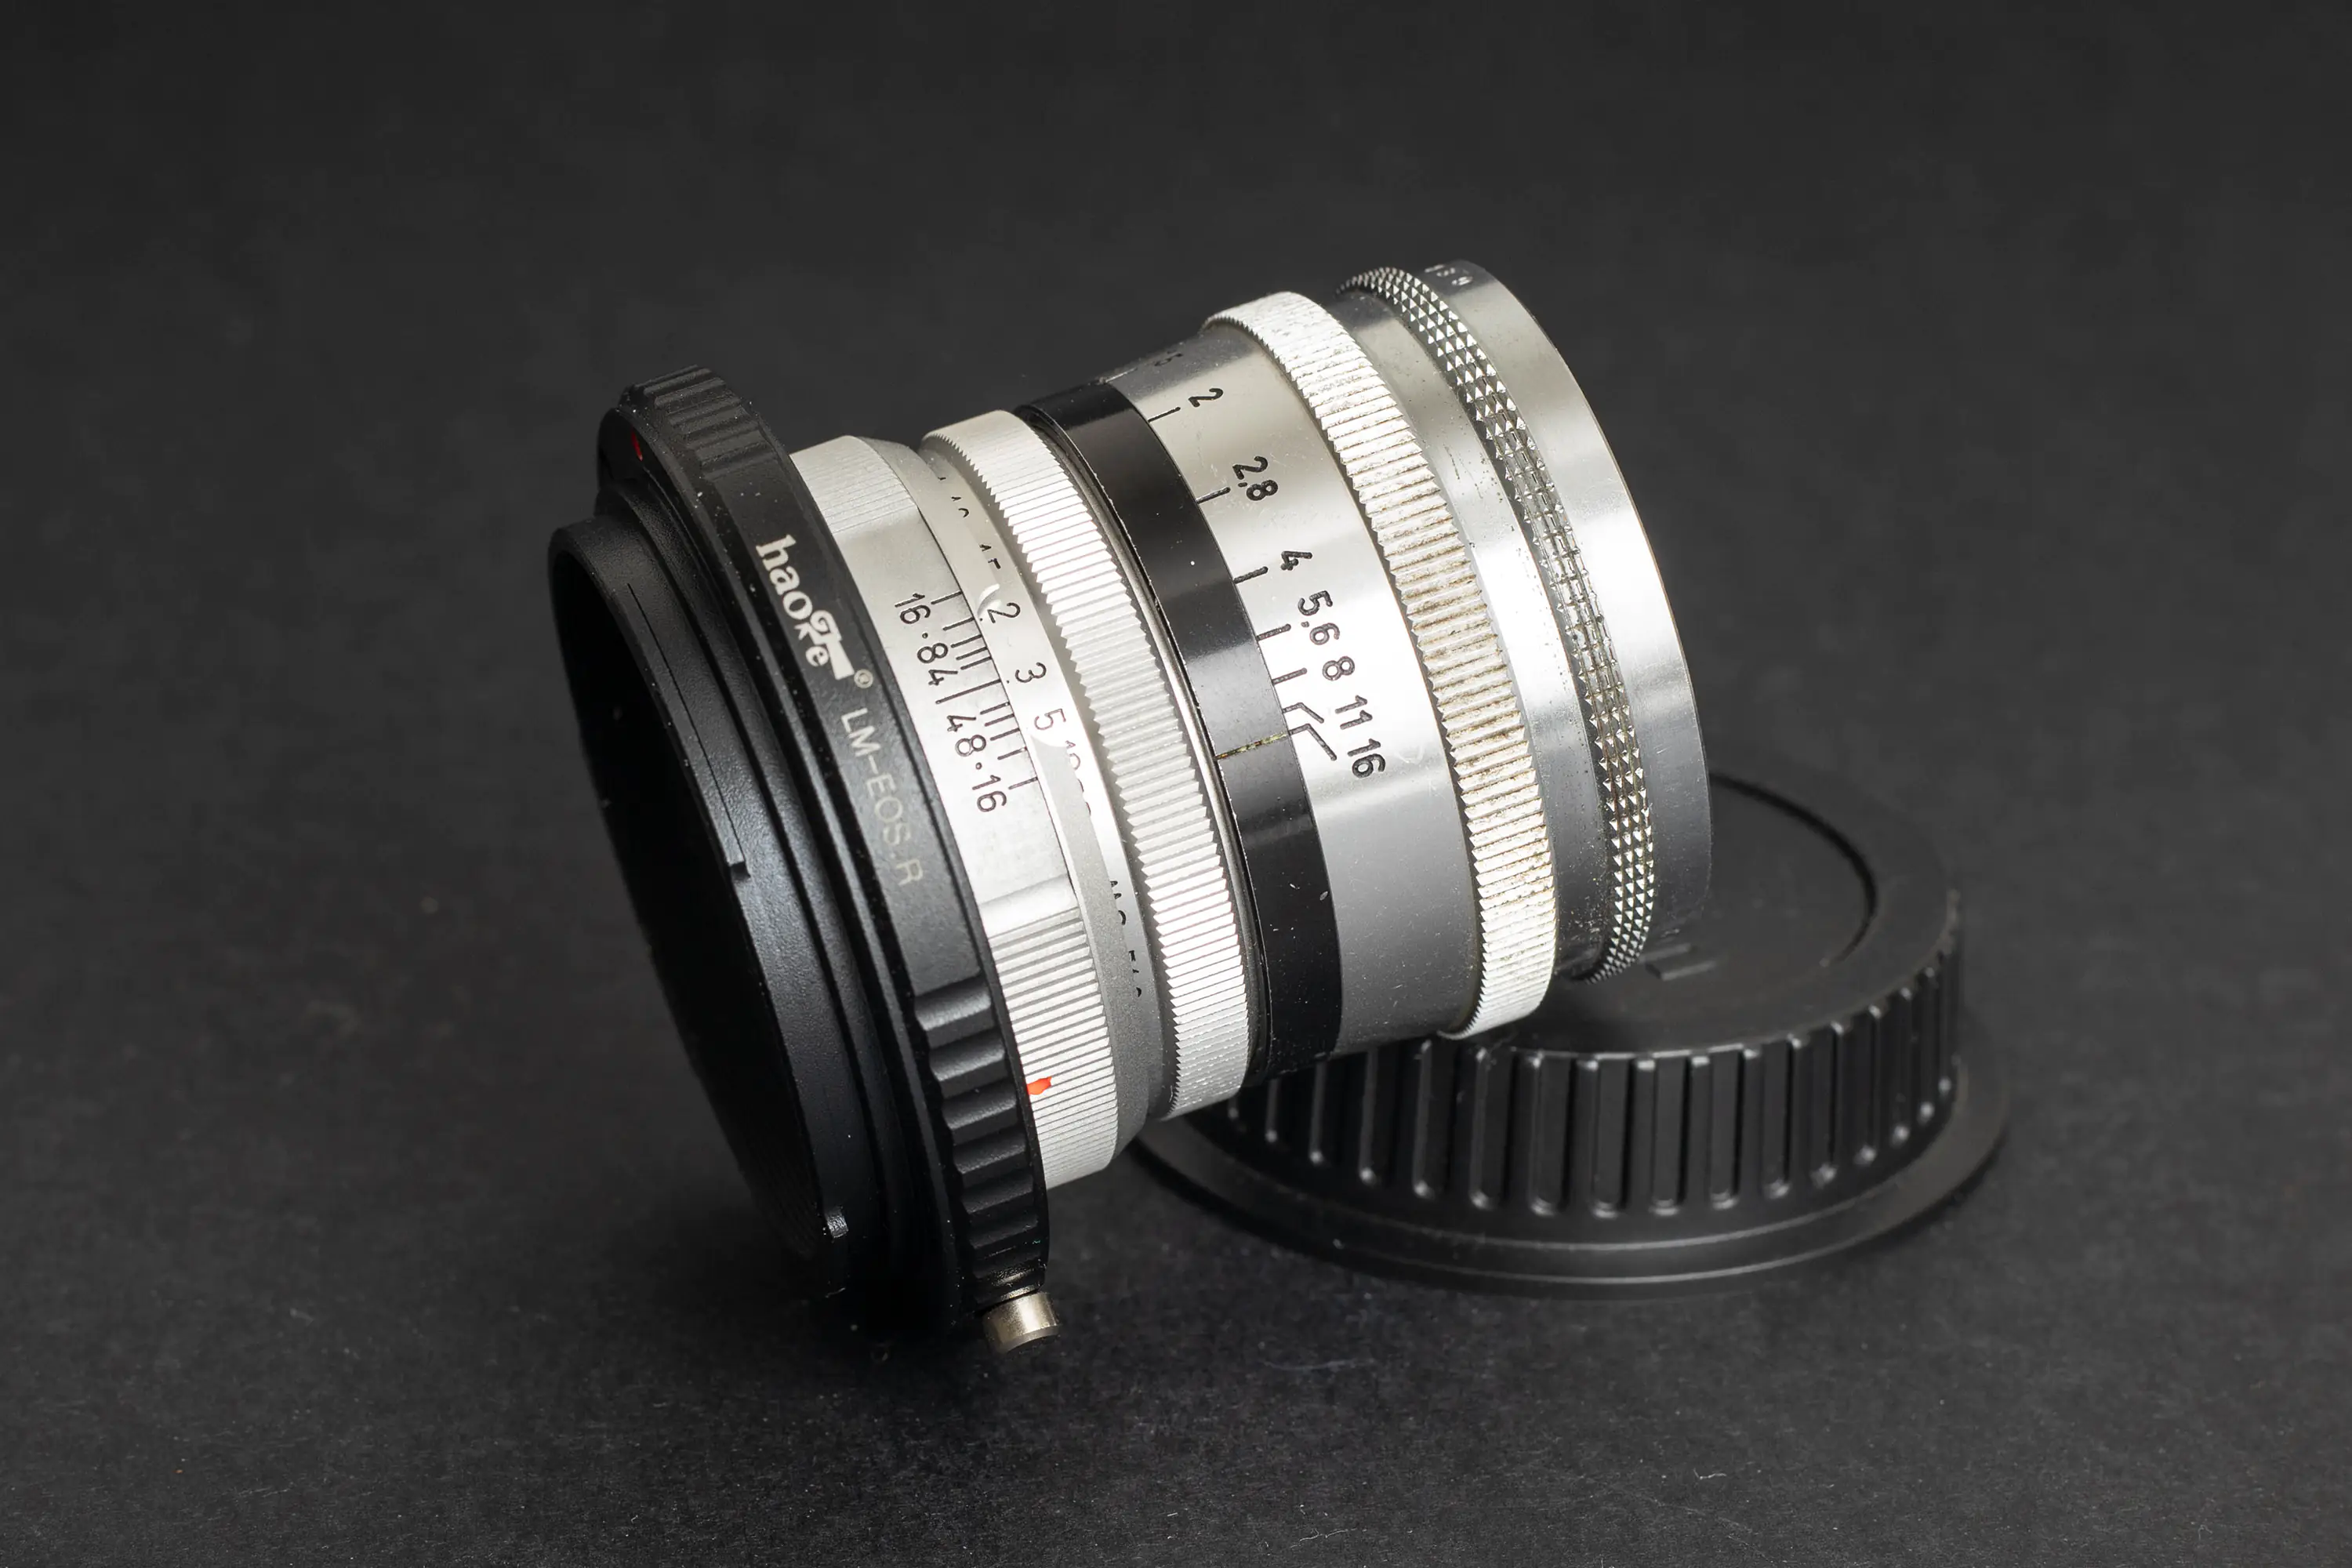 Voigtlander Nokton 50mm f1.5 with the two adapters, allowing the use of the lens on the Canon EOS R.